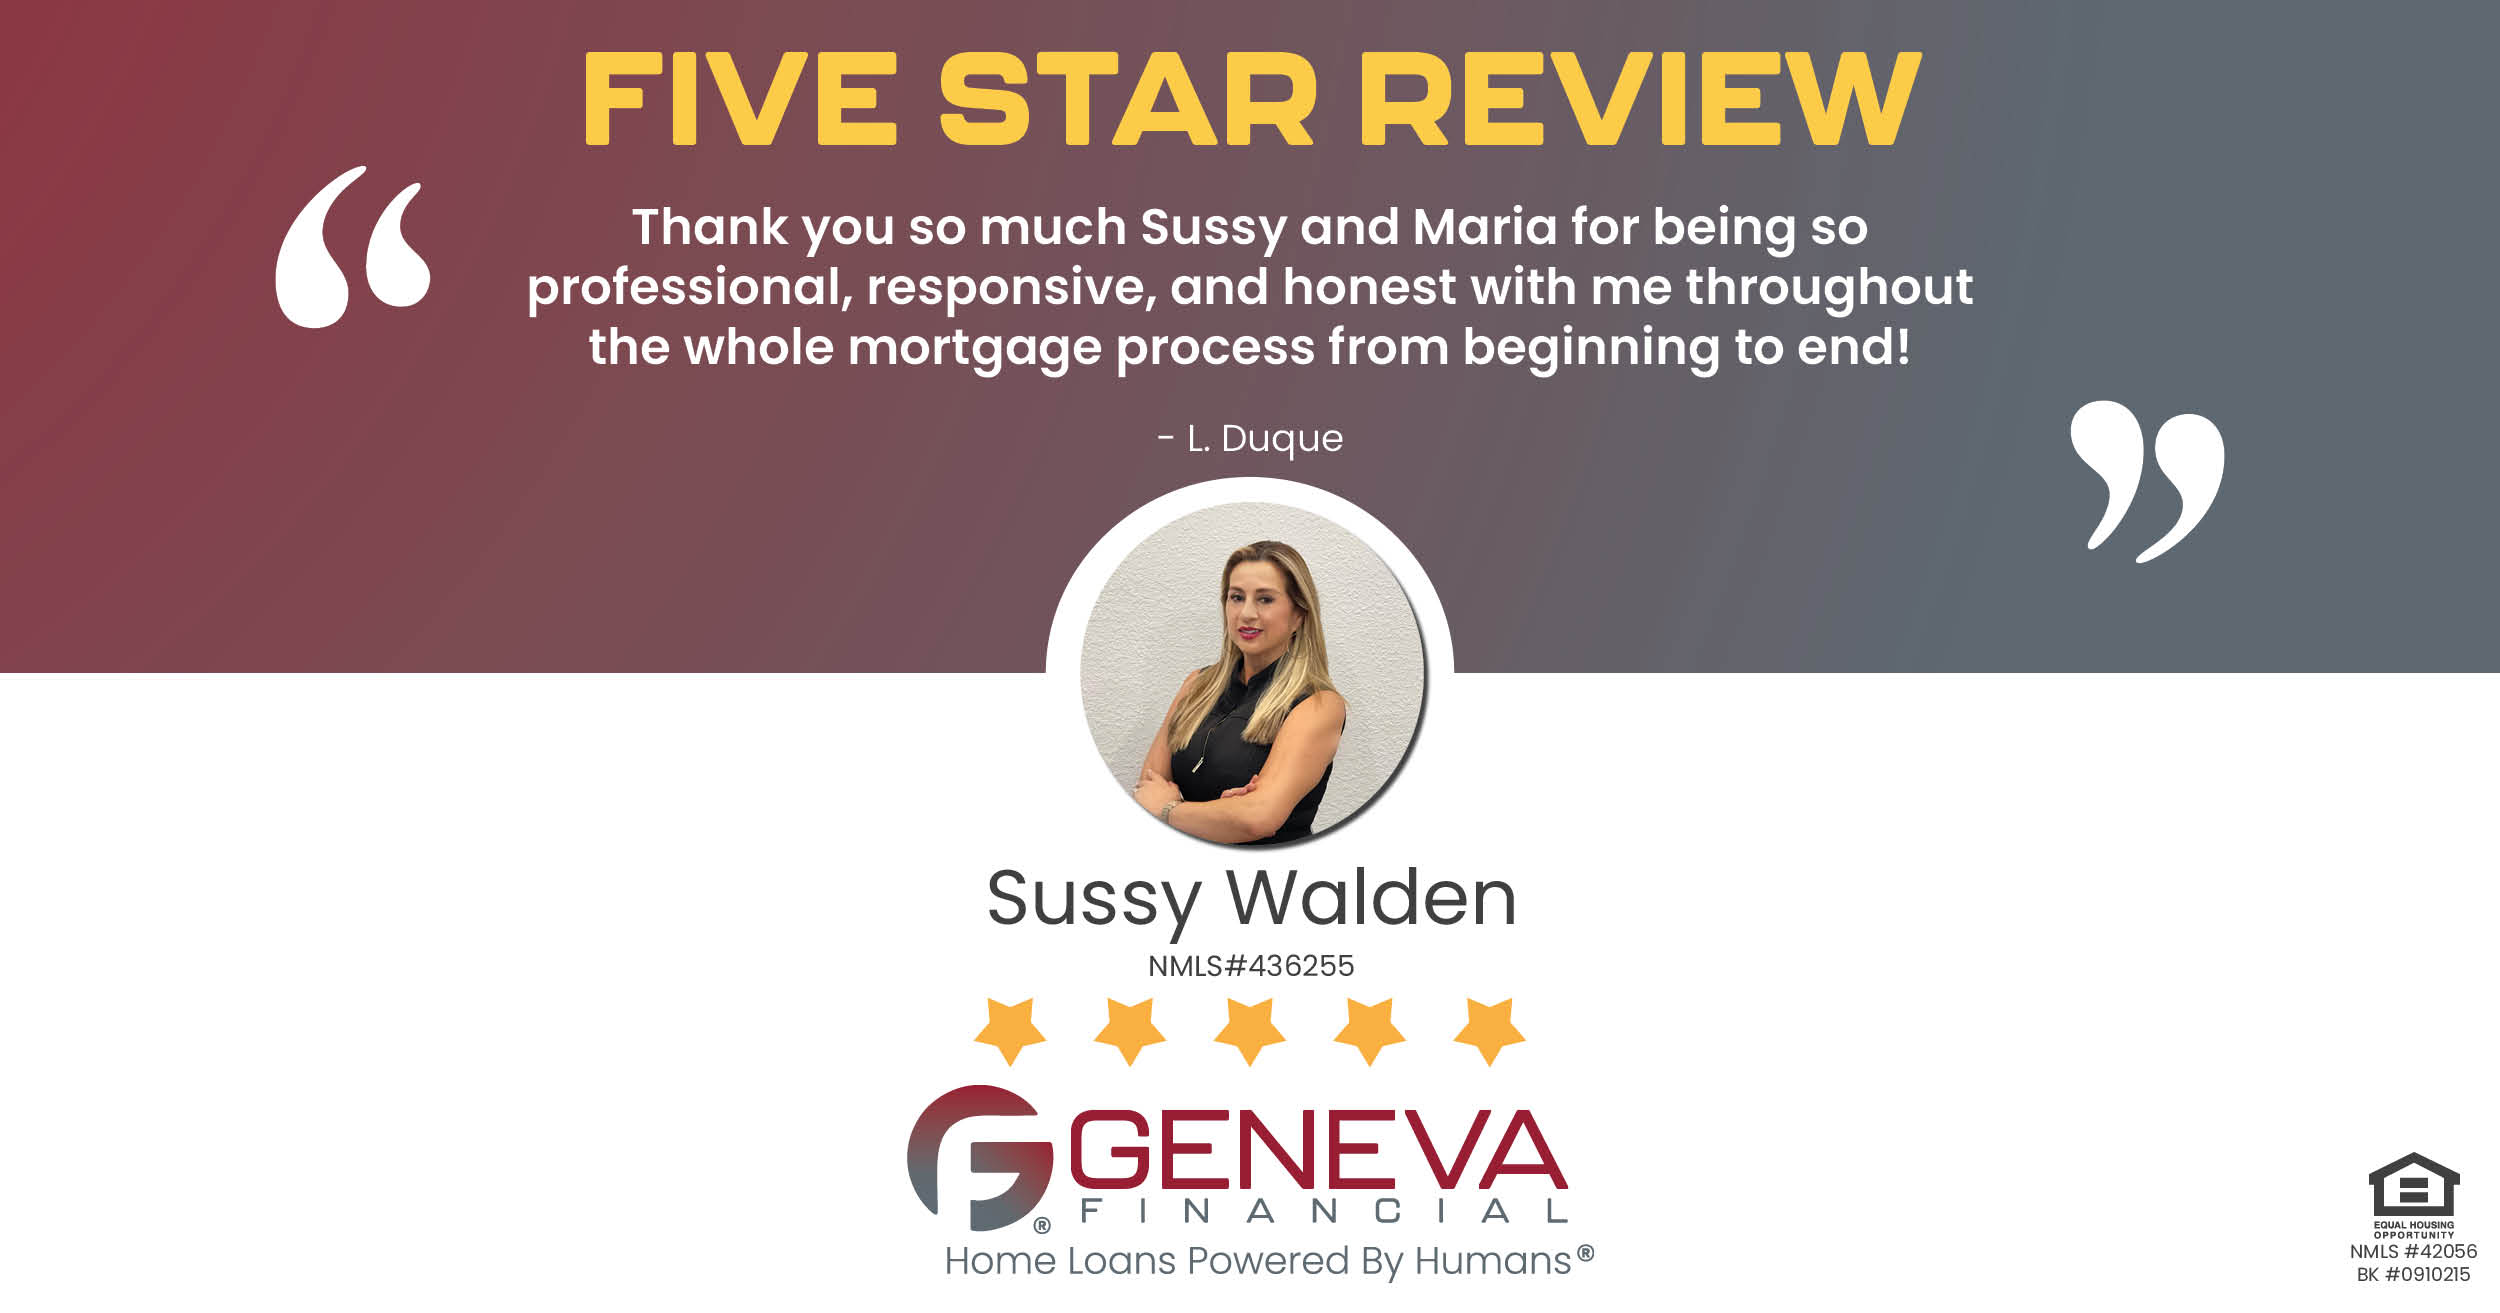 5 Star Review for Sussy Walden, Licensed Mortgage Branch Manager with Geneva Financial, Naples, FL – Home Loans Powered by Humans®.